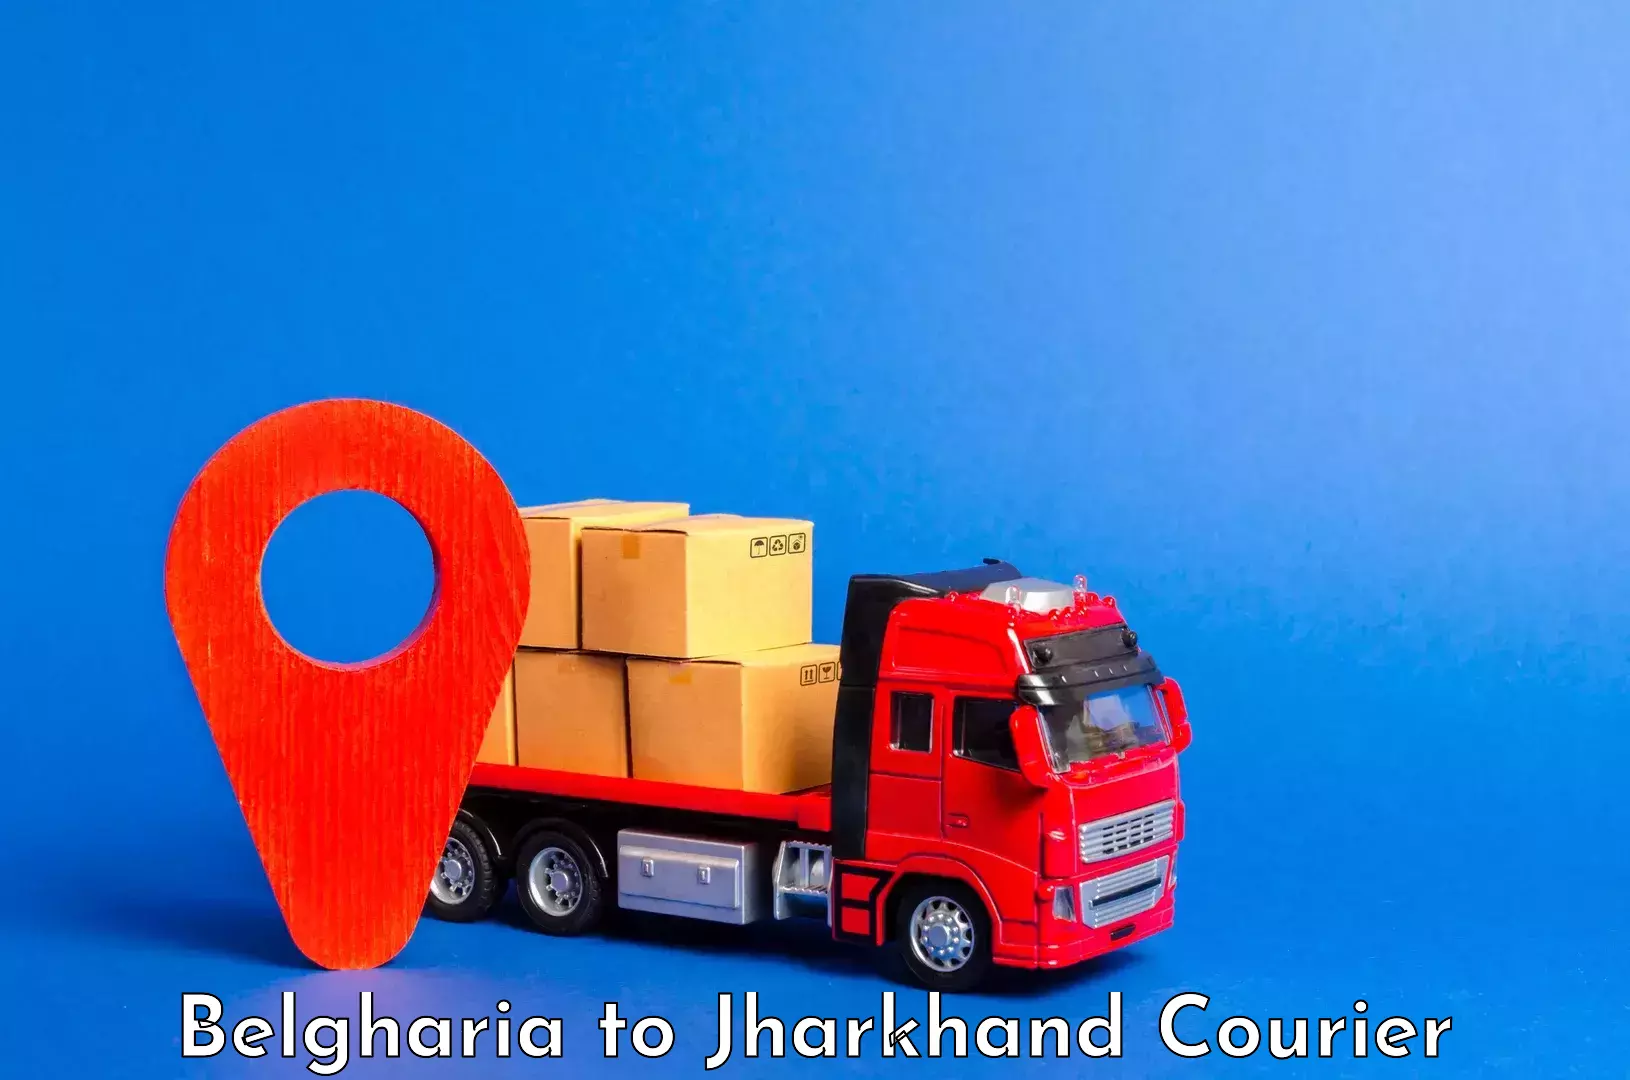 Luggage shipping guide Belgharia to Peterbar